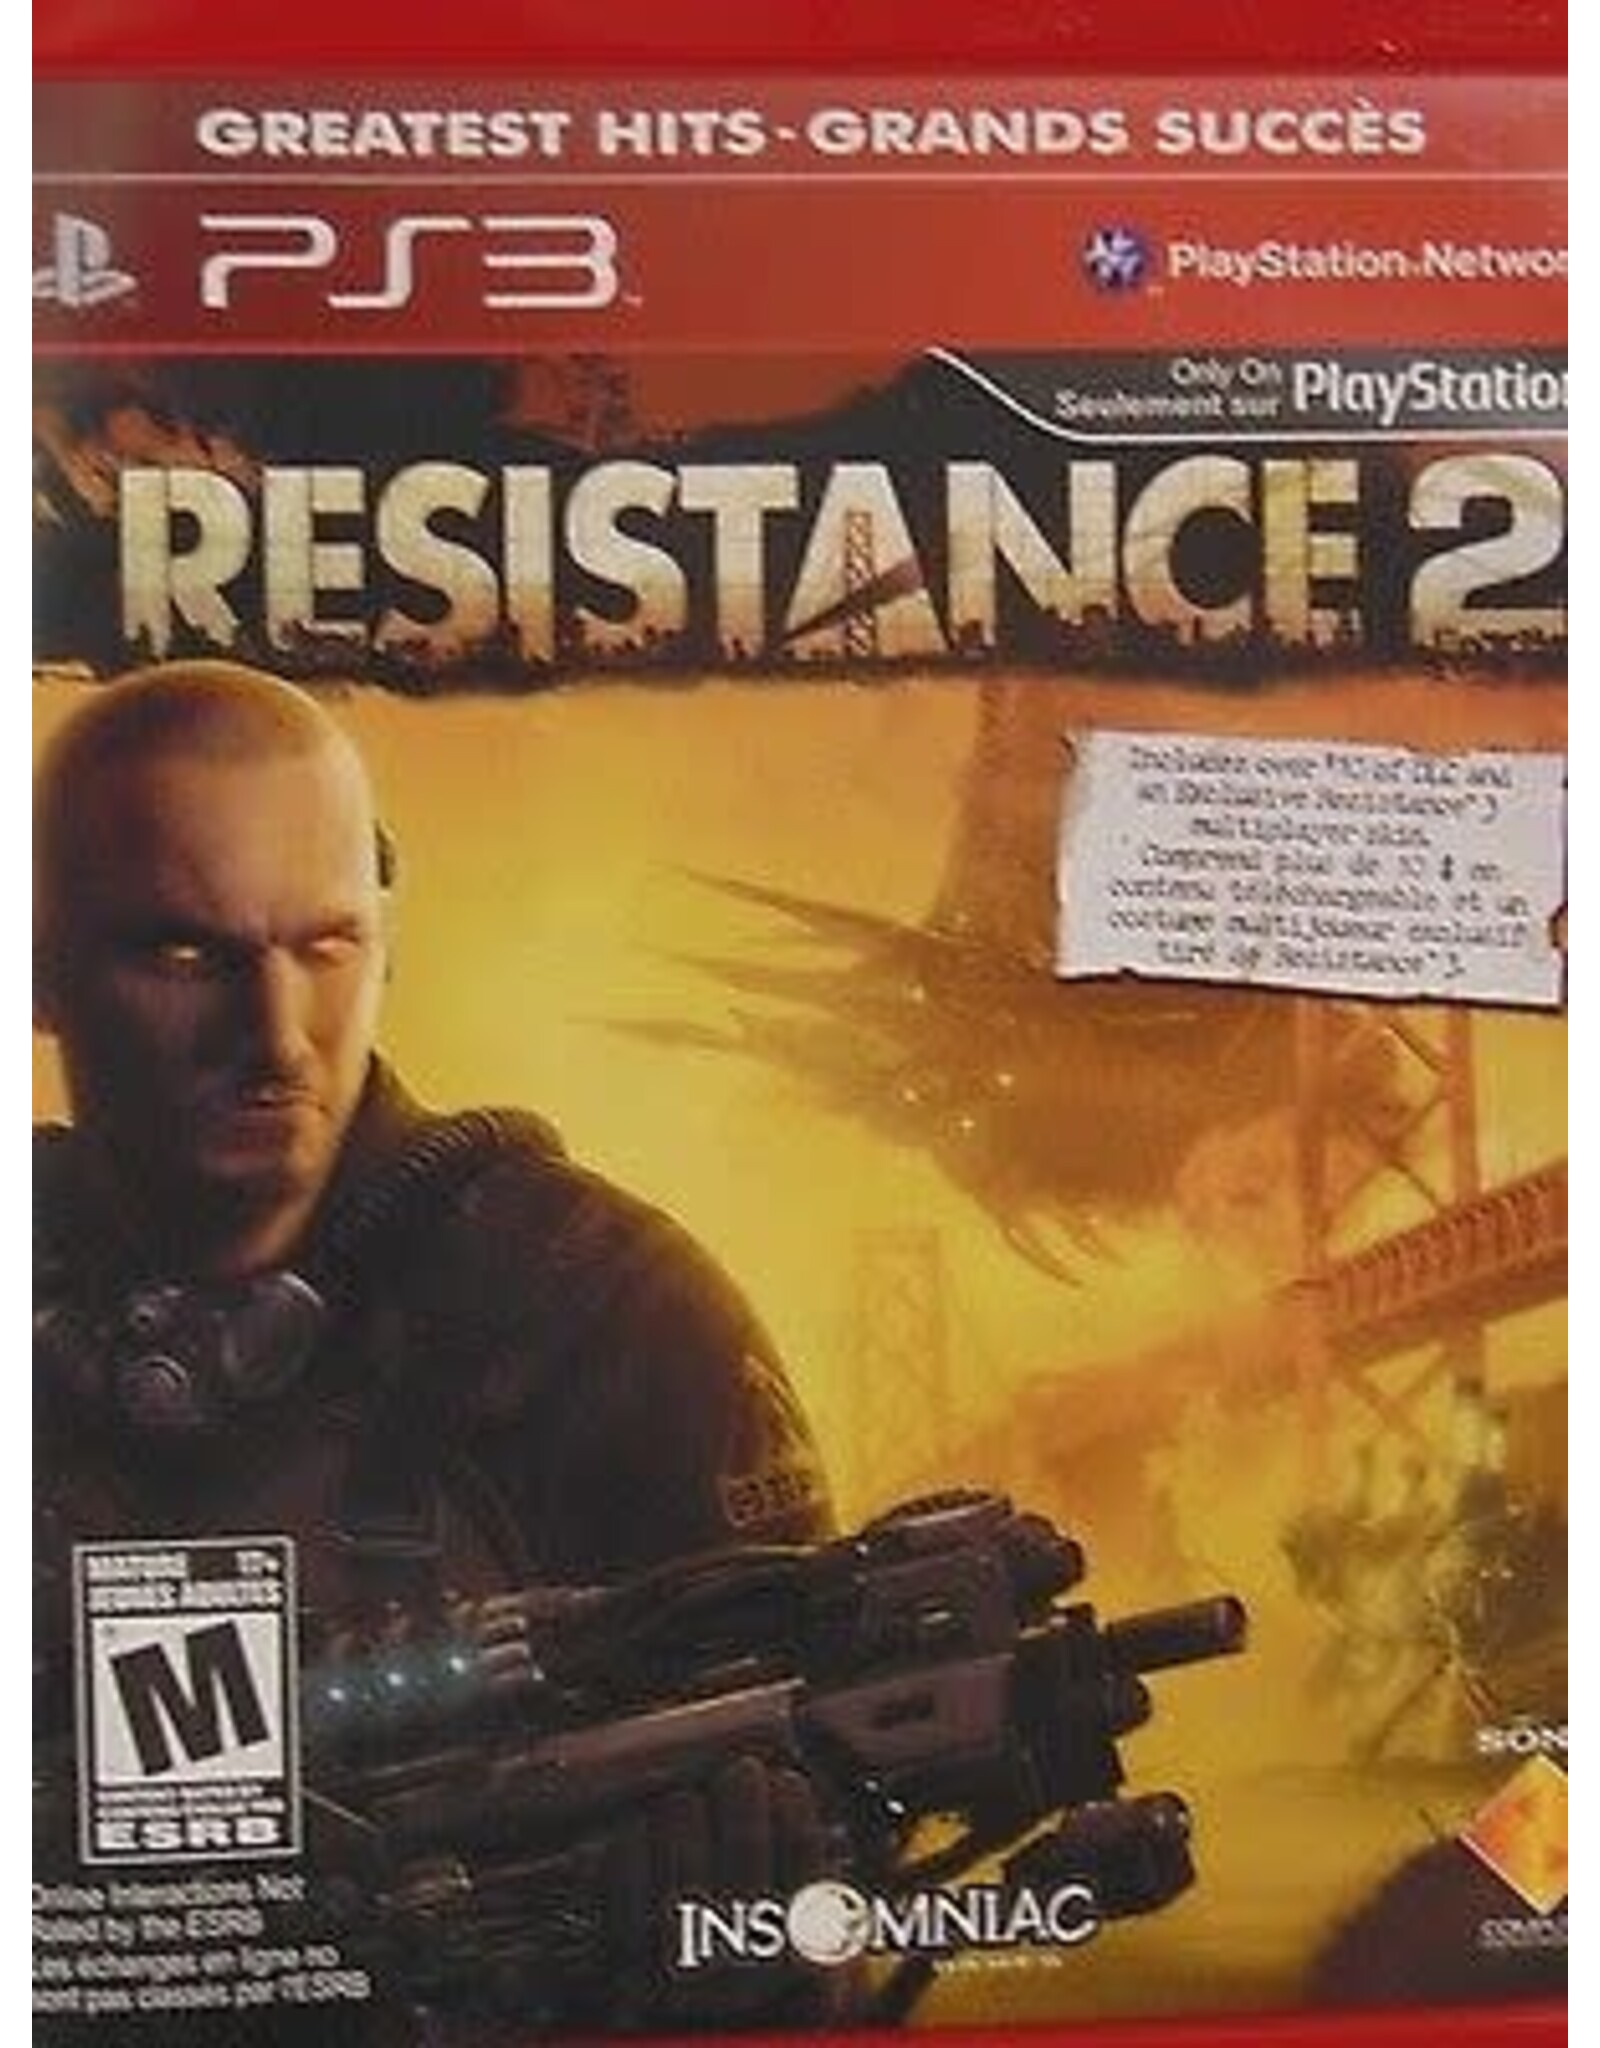 Playstation 3 Resistance 2 - Greatest Hits (Used)